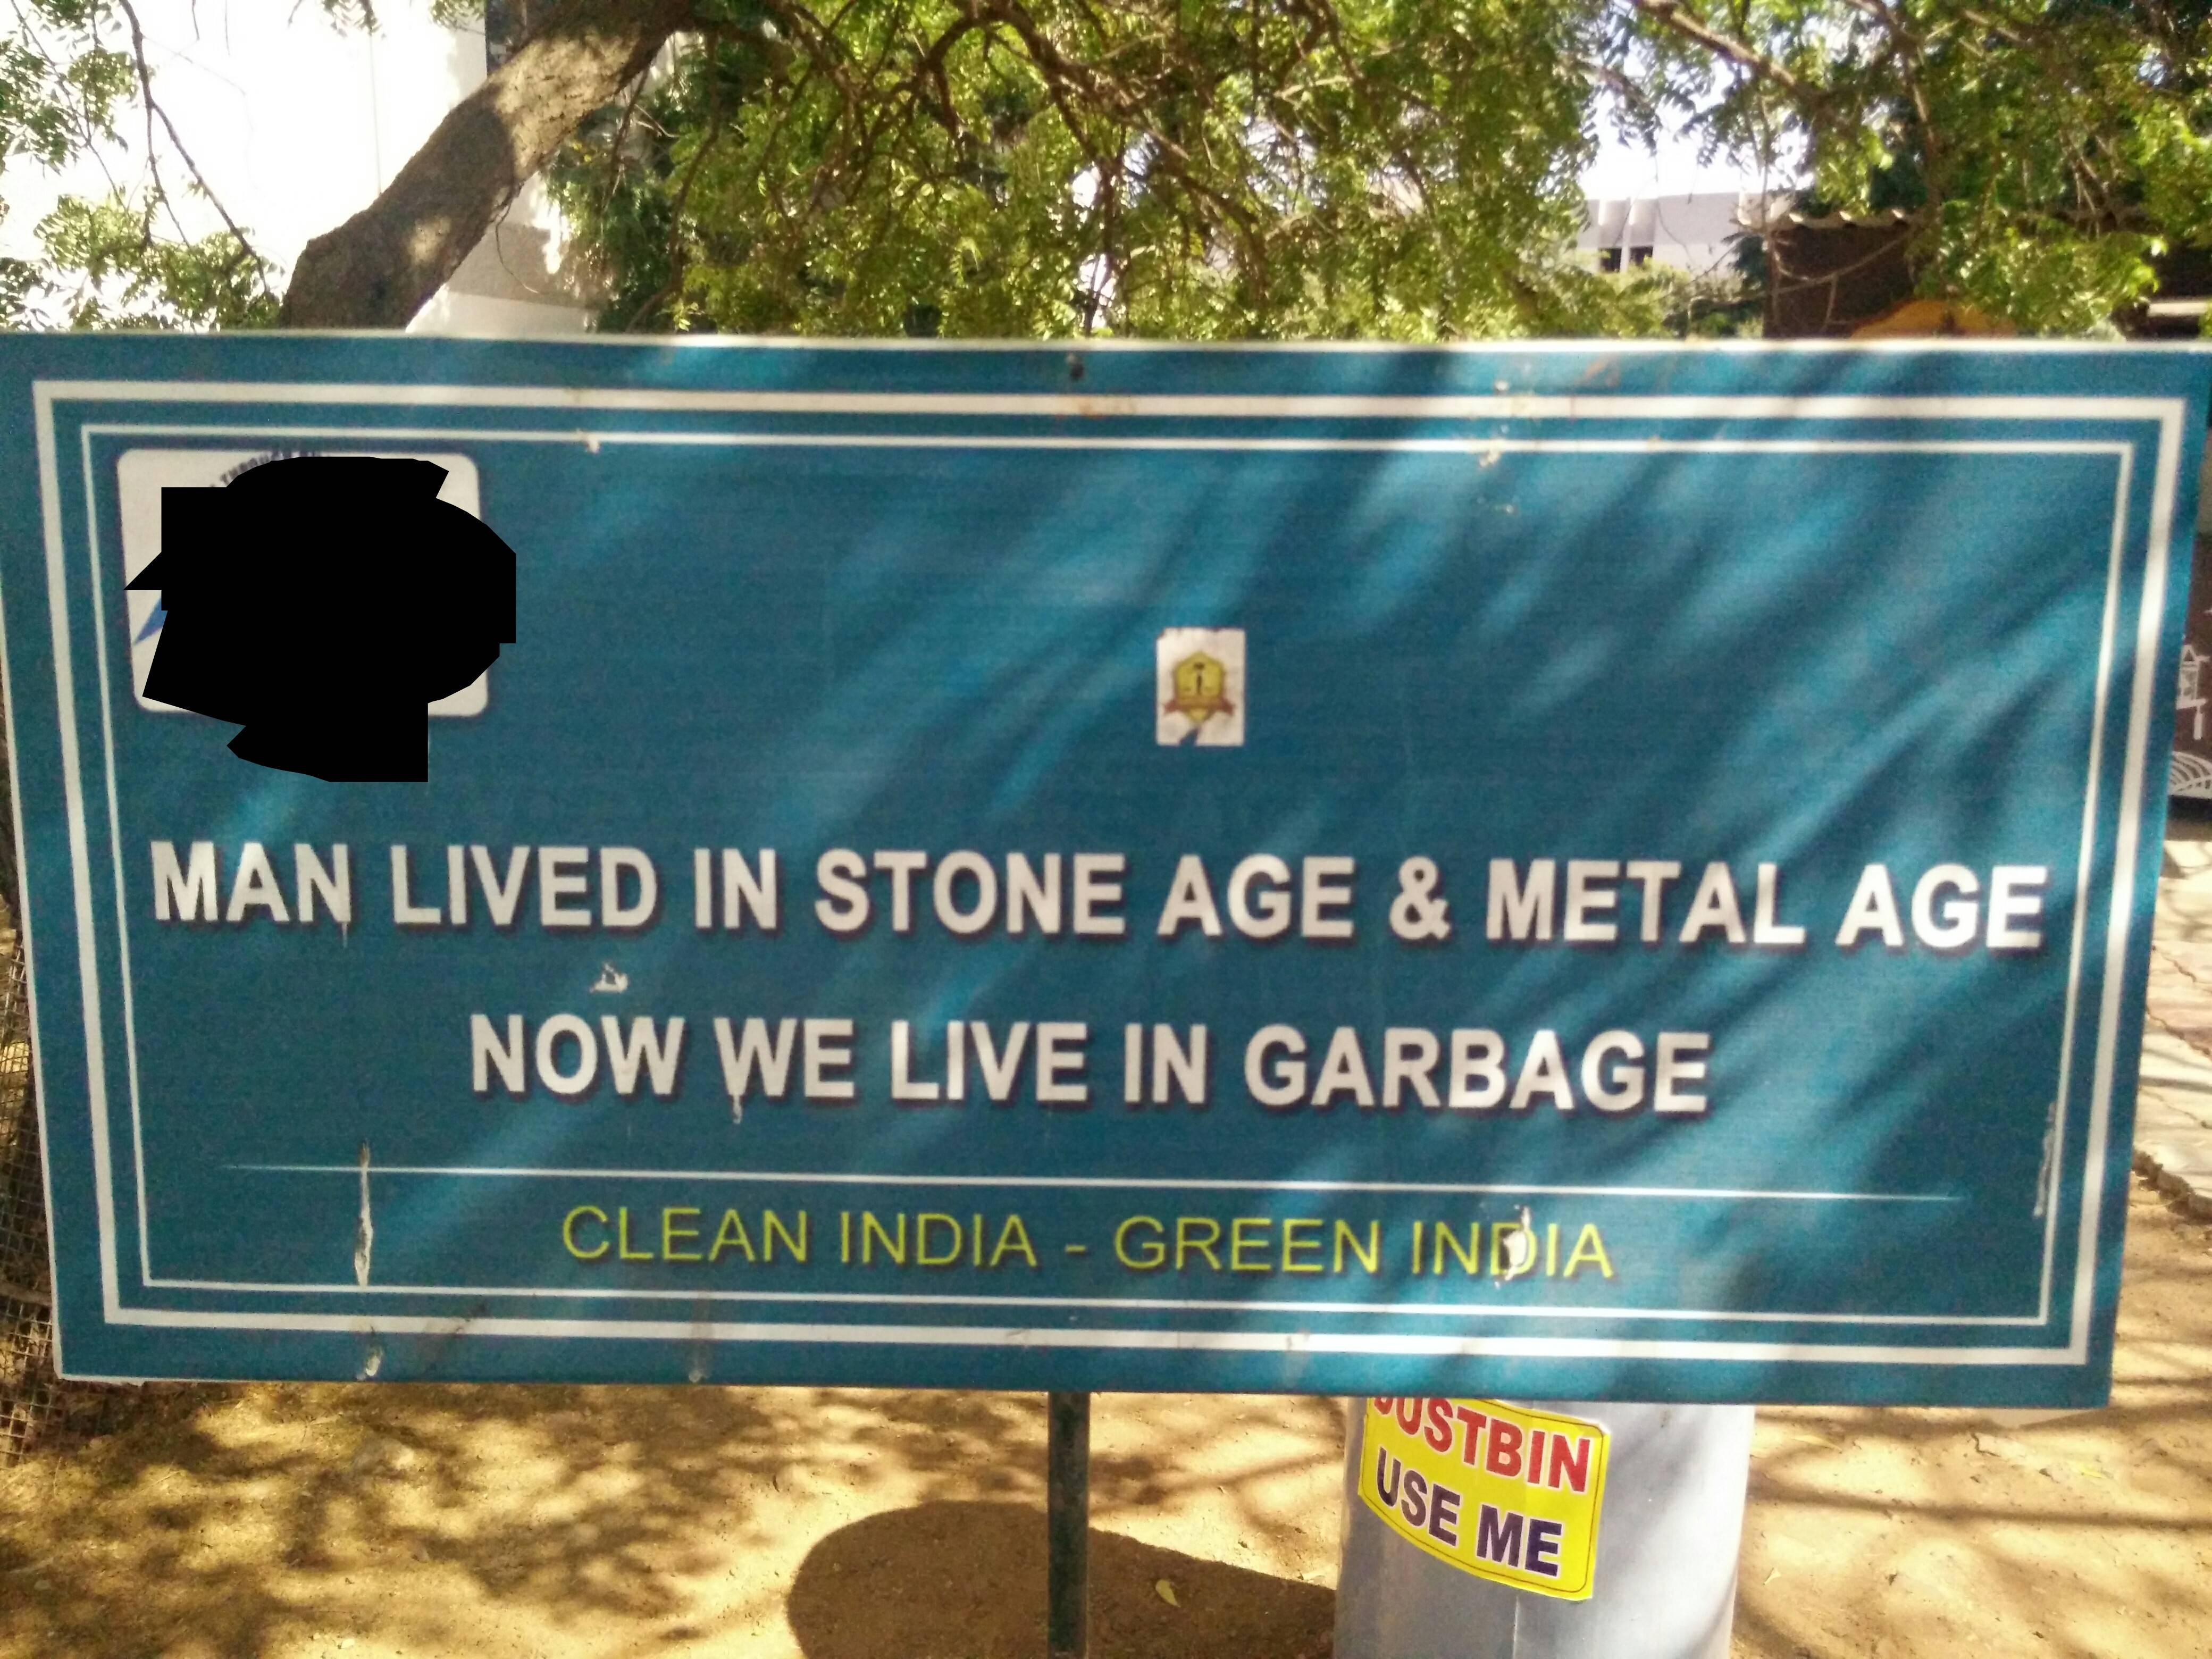 robin sharma - Man Lived In Stone Age & Metal Age Now We Live In Garbage Clean India Green India Custbin Use Me